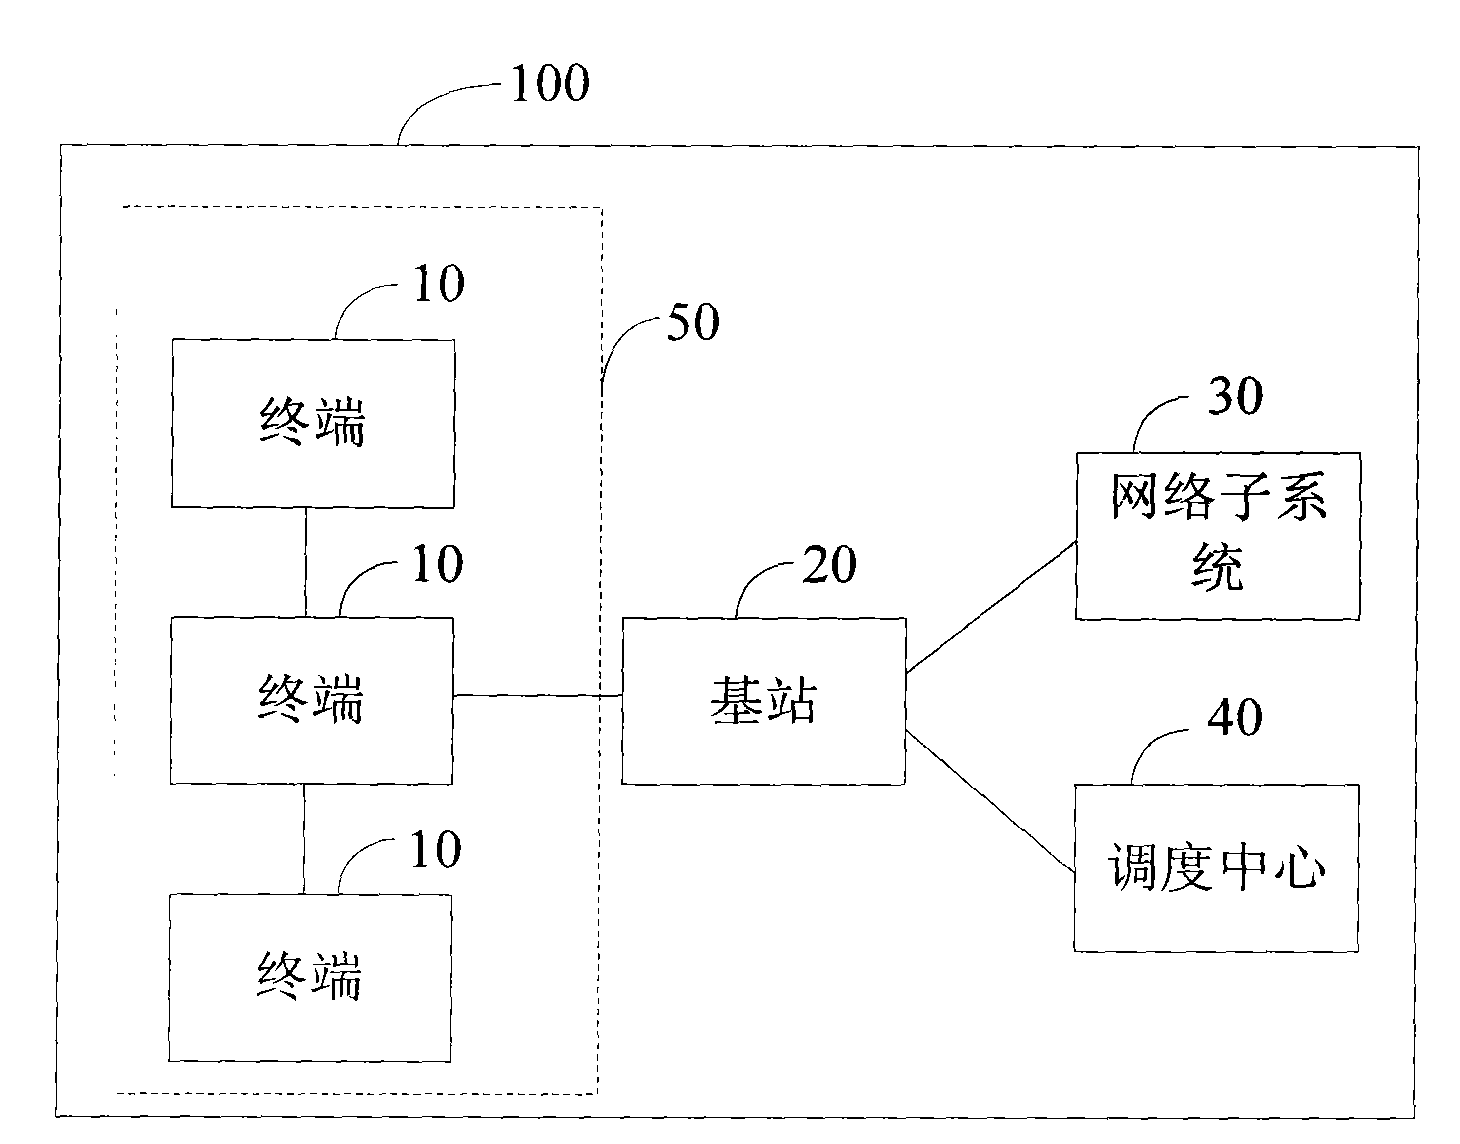 Digital cluster communication system for private network communication